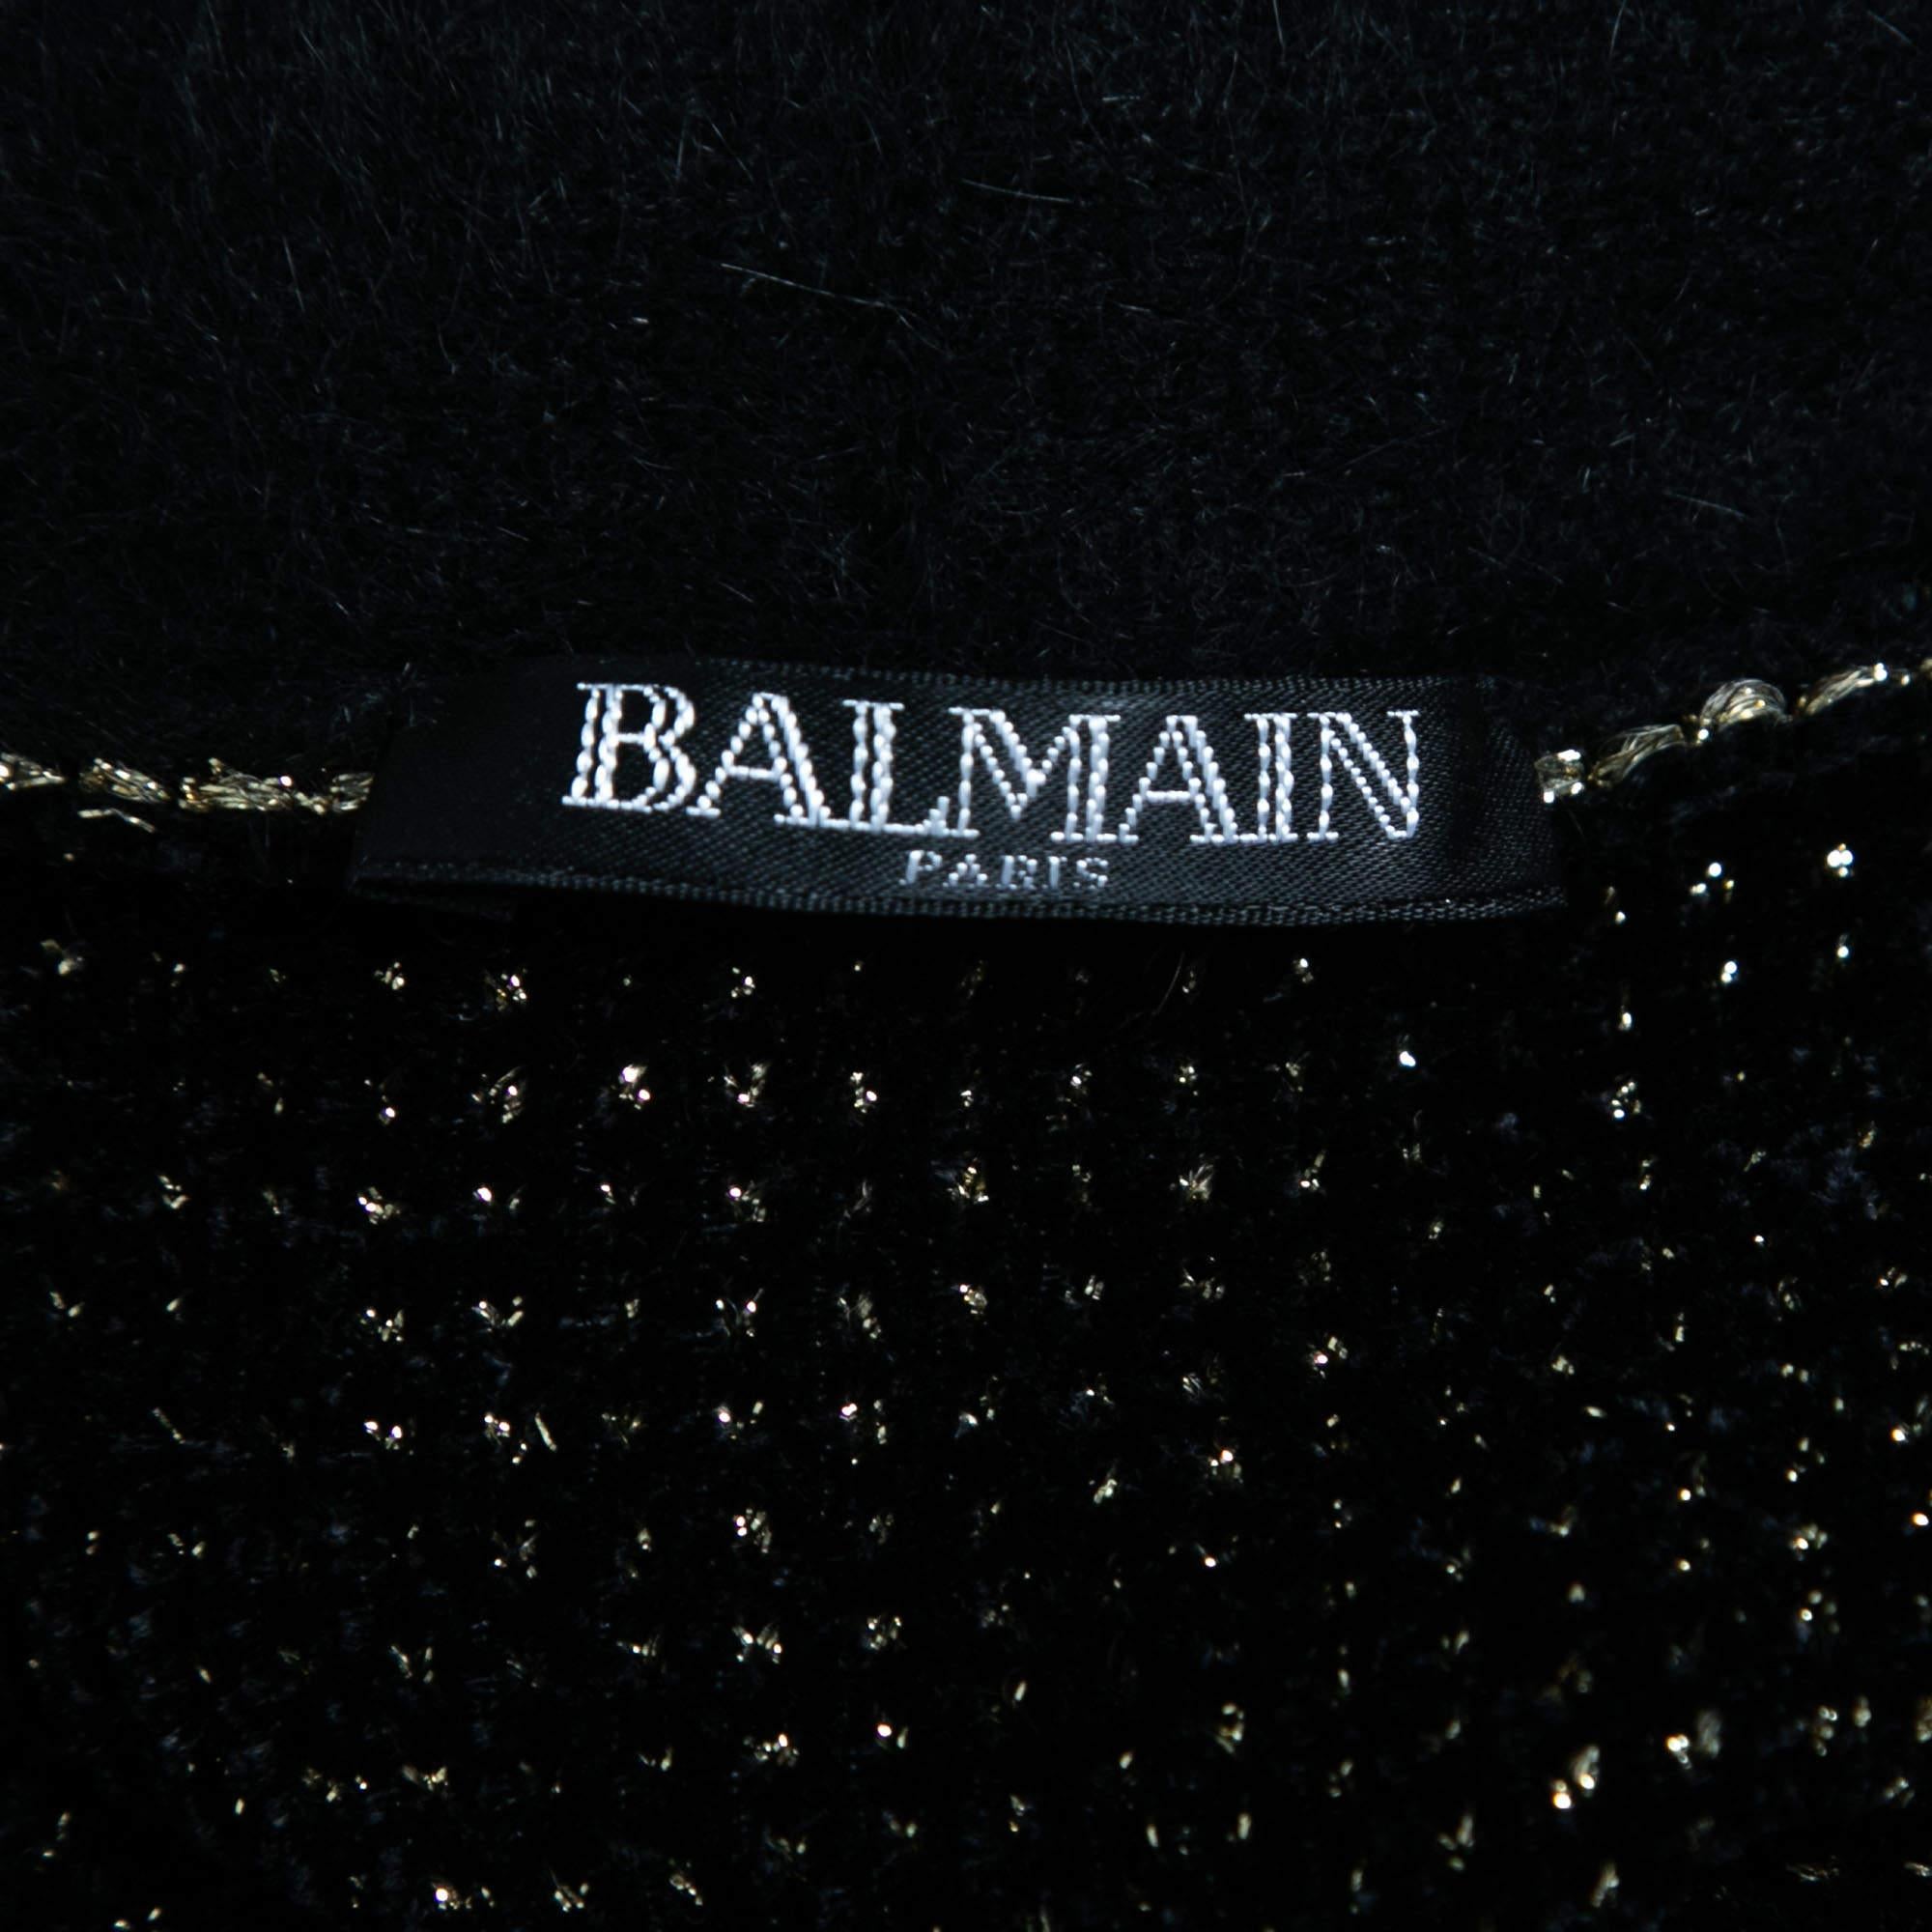 Bring elegance, sophistication, and style to your wardrobe with this Balmain cardigan. Made from good fabric and styled with classy elements, this cardigan is a great pick for the winter.

Accessories: Belt